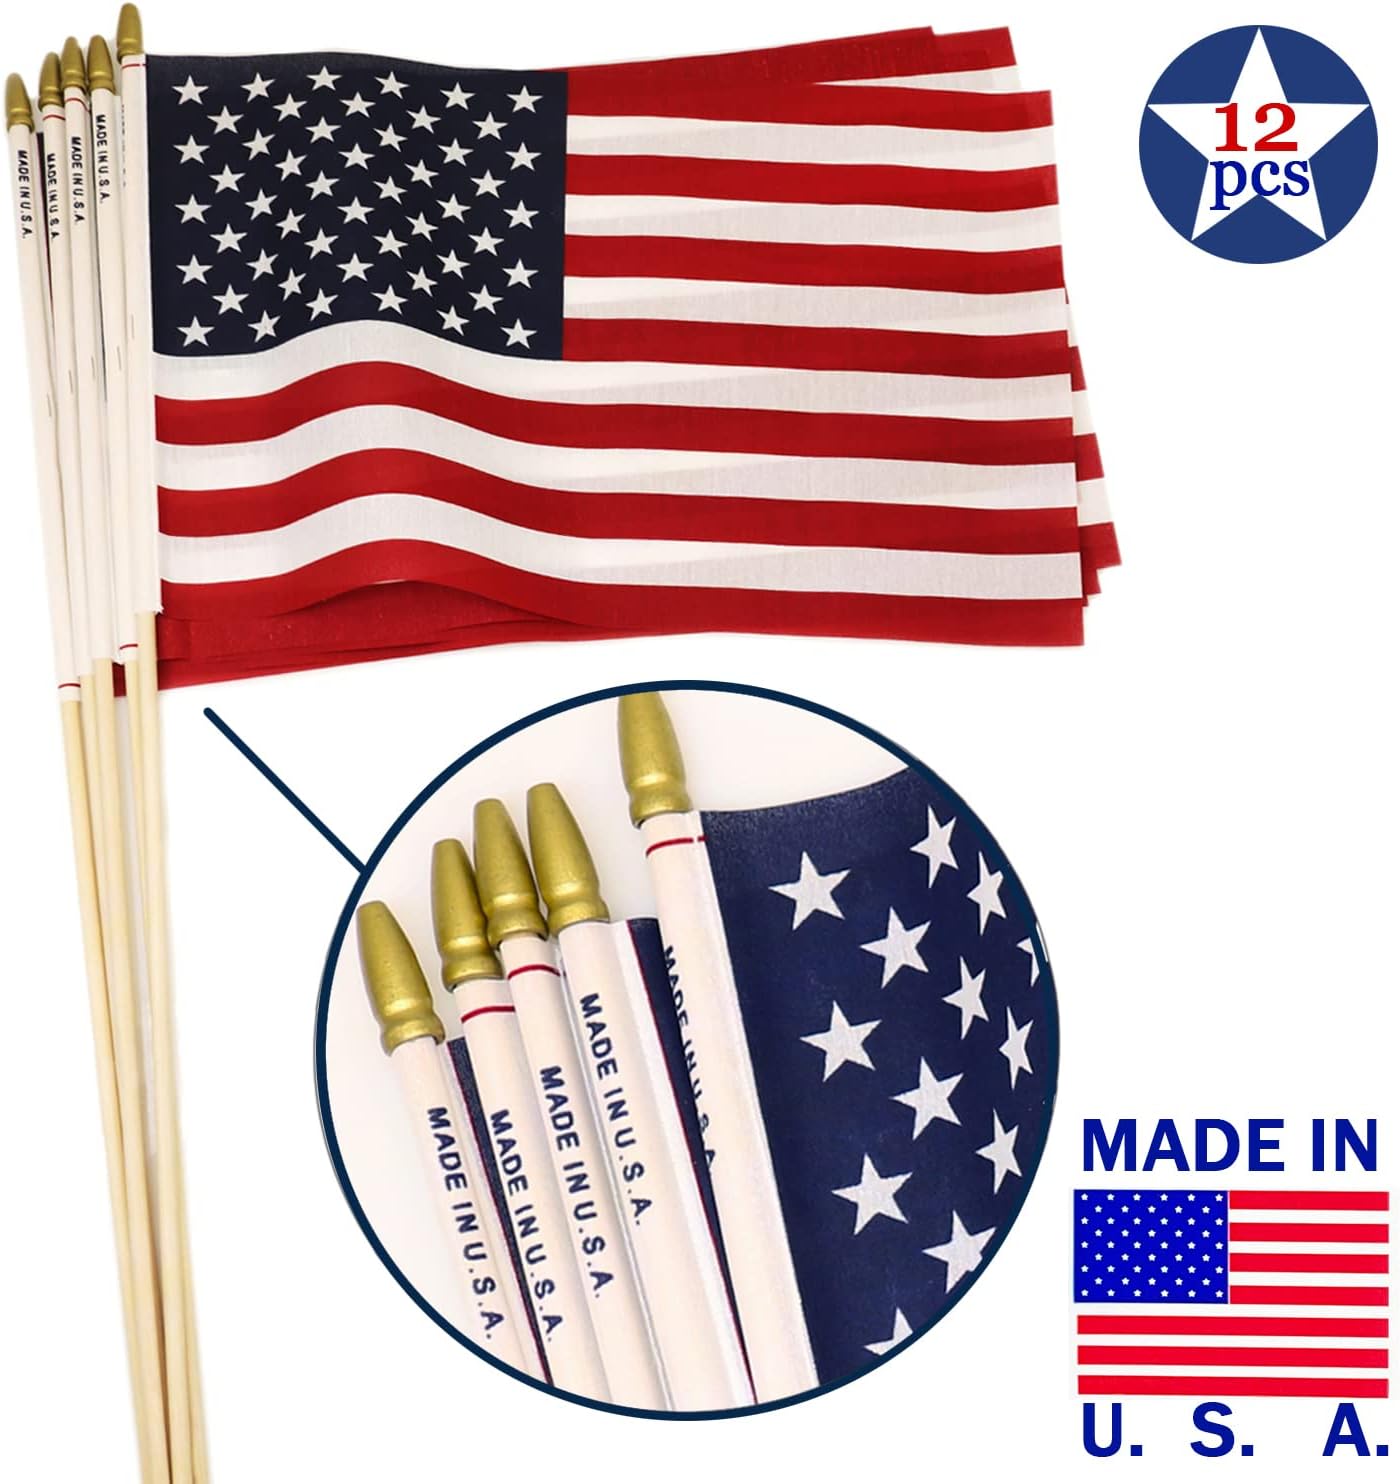 GIFTEXPRESS 12" * 18" American Flag Proudly Made in U.S.A.